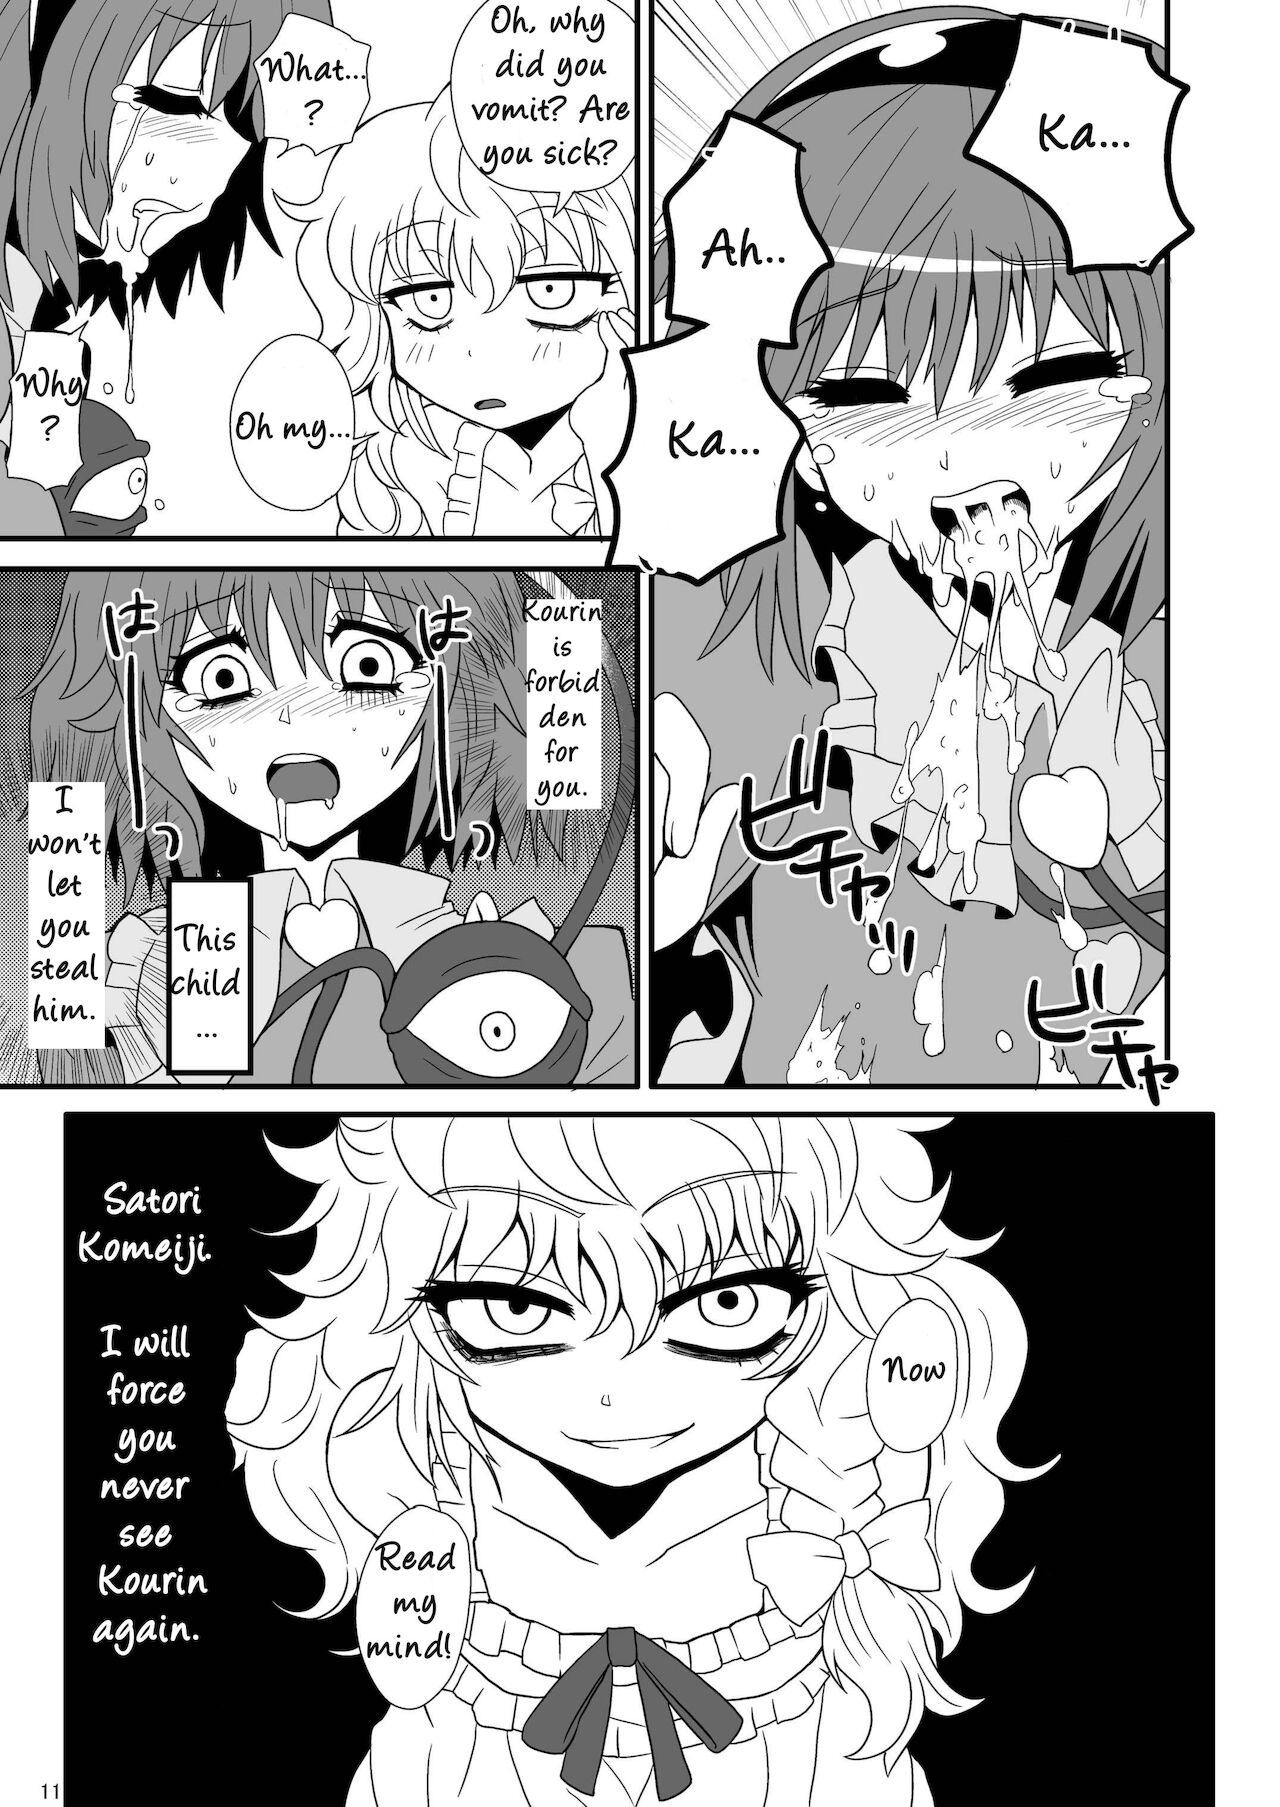 Teensnow [Zuru] Marisa's thrill - Take care of yourself - 通り魔理沙にきをつけろ - Part 1 - Touhou project Bangladeshi - Page 13